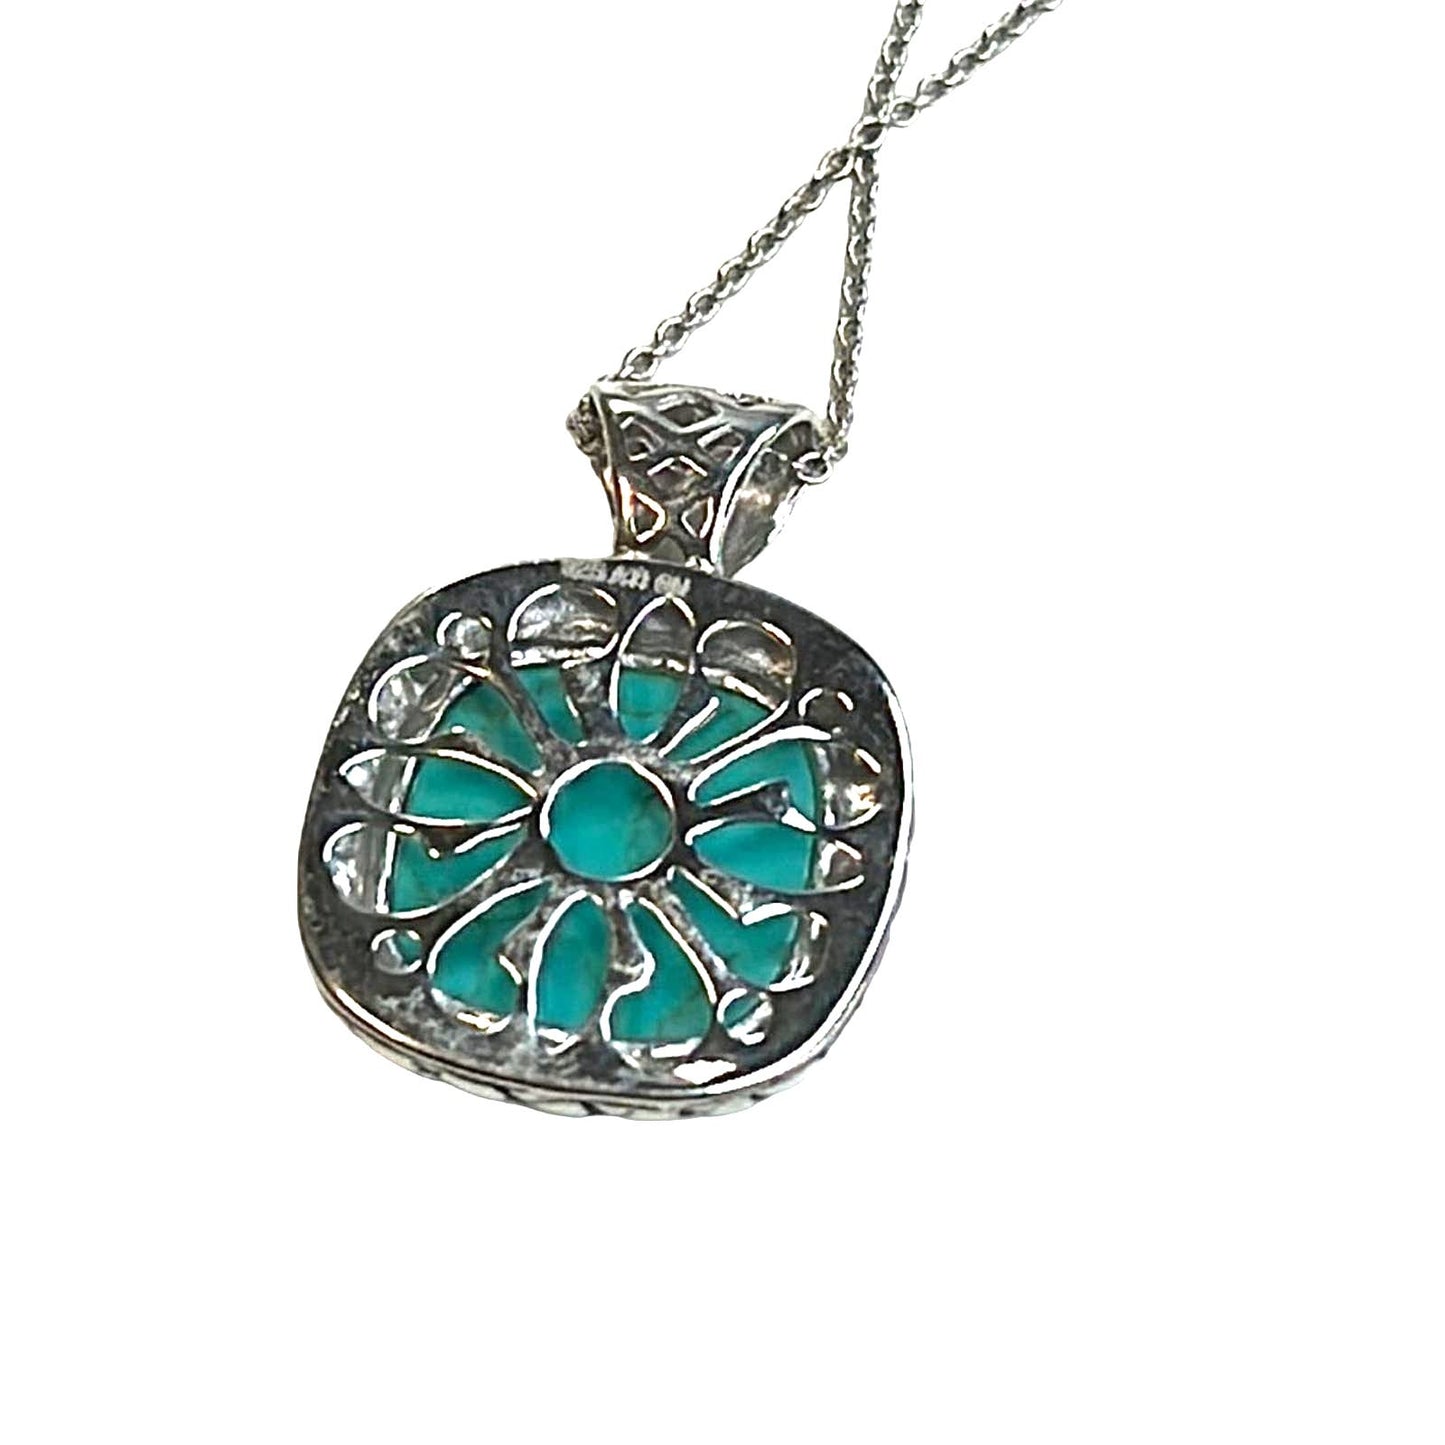 R. H. Macy Silver & Turquoise Square Necklace, NWT!